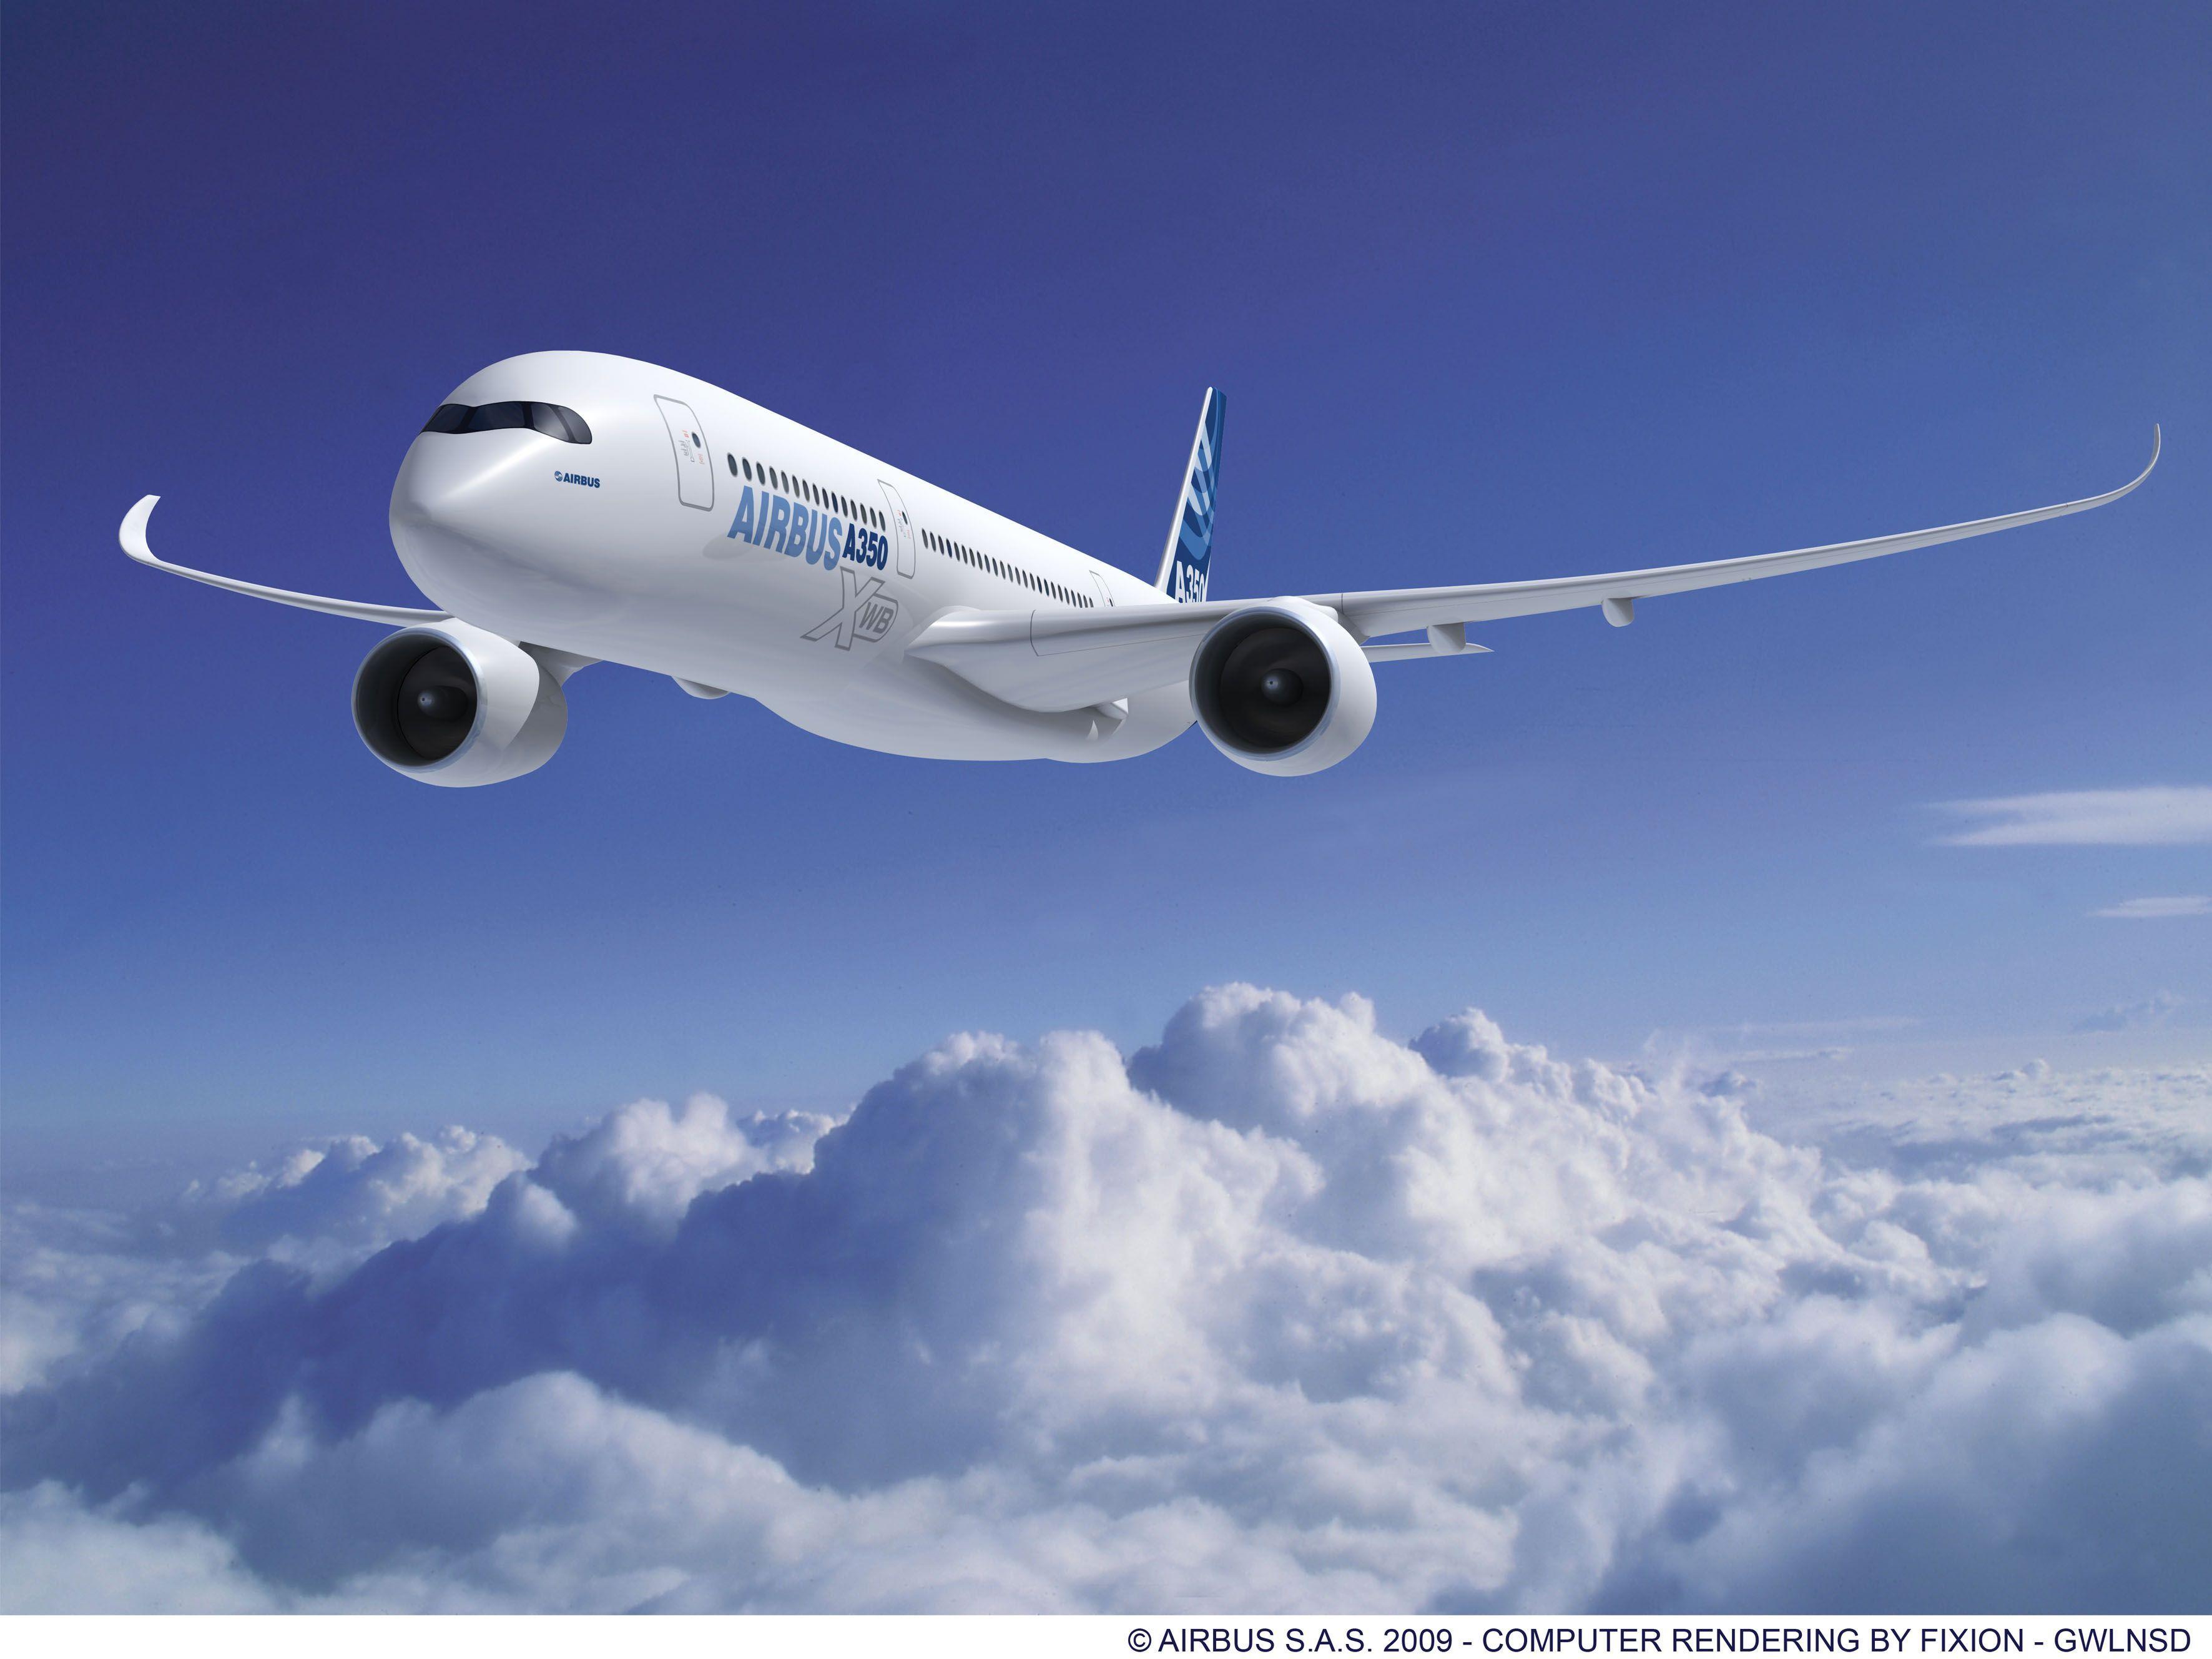 FACC starts working on production of first winglets for Airbus